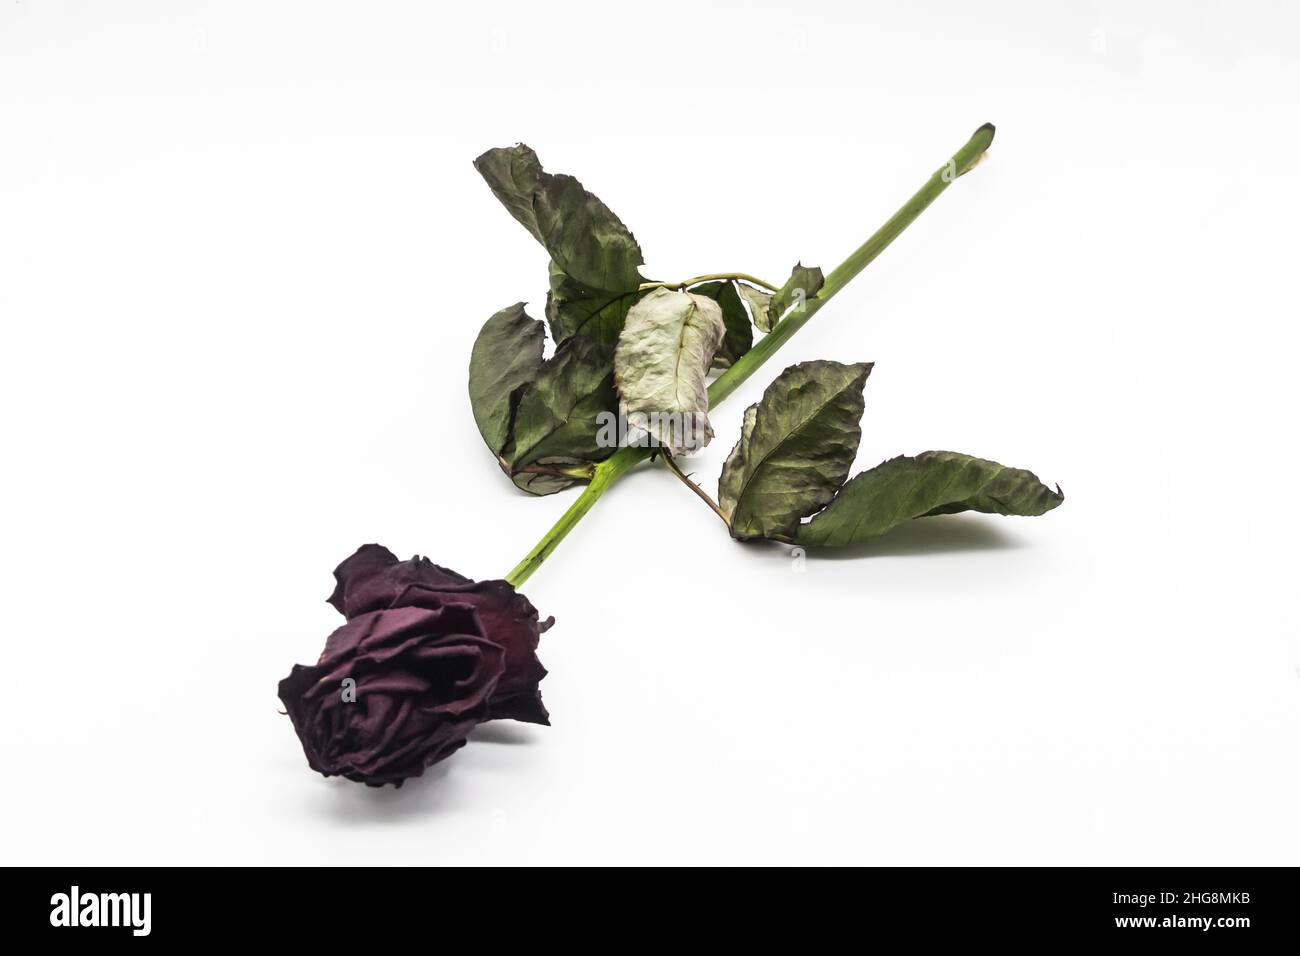 A red (purple) dry rose on a white background. Stock Photo